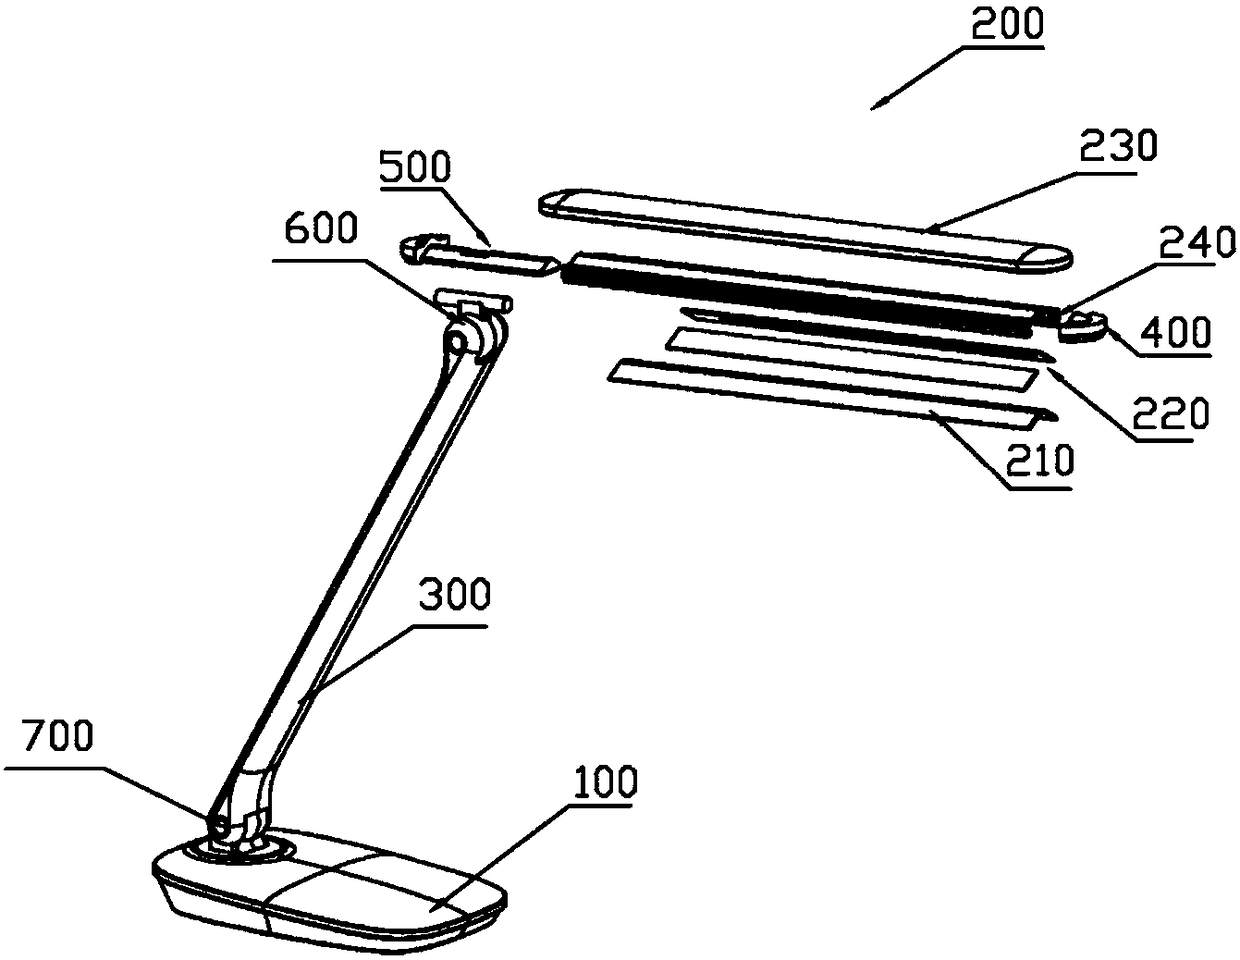 A desk lamp with light distribution function